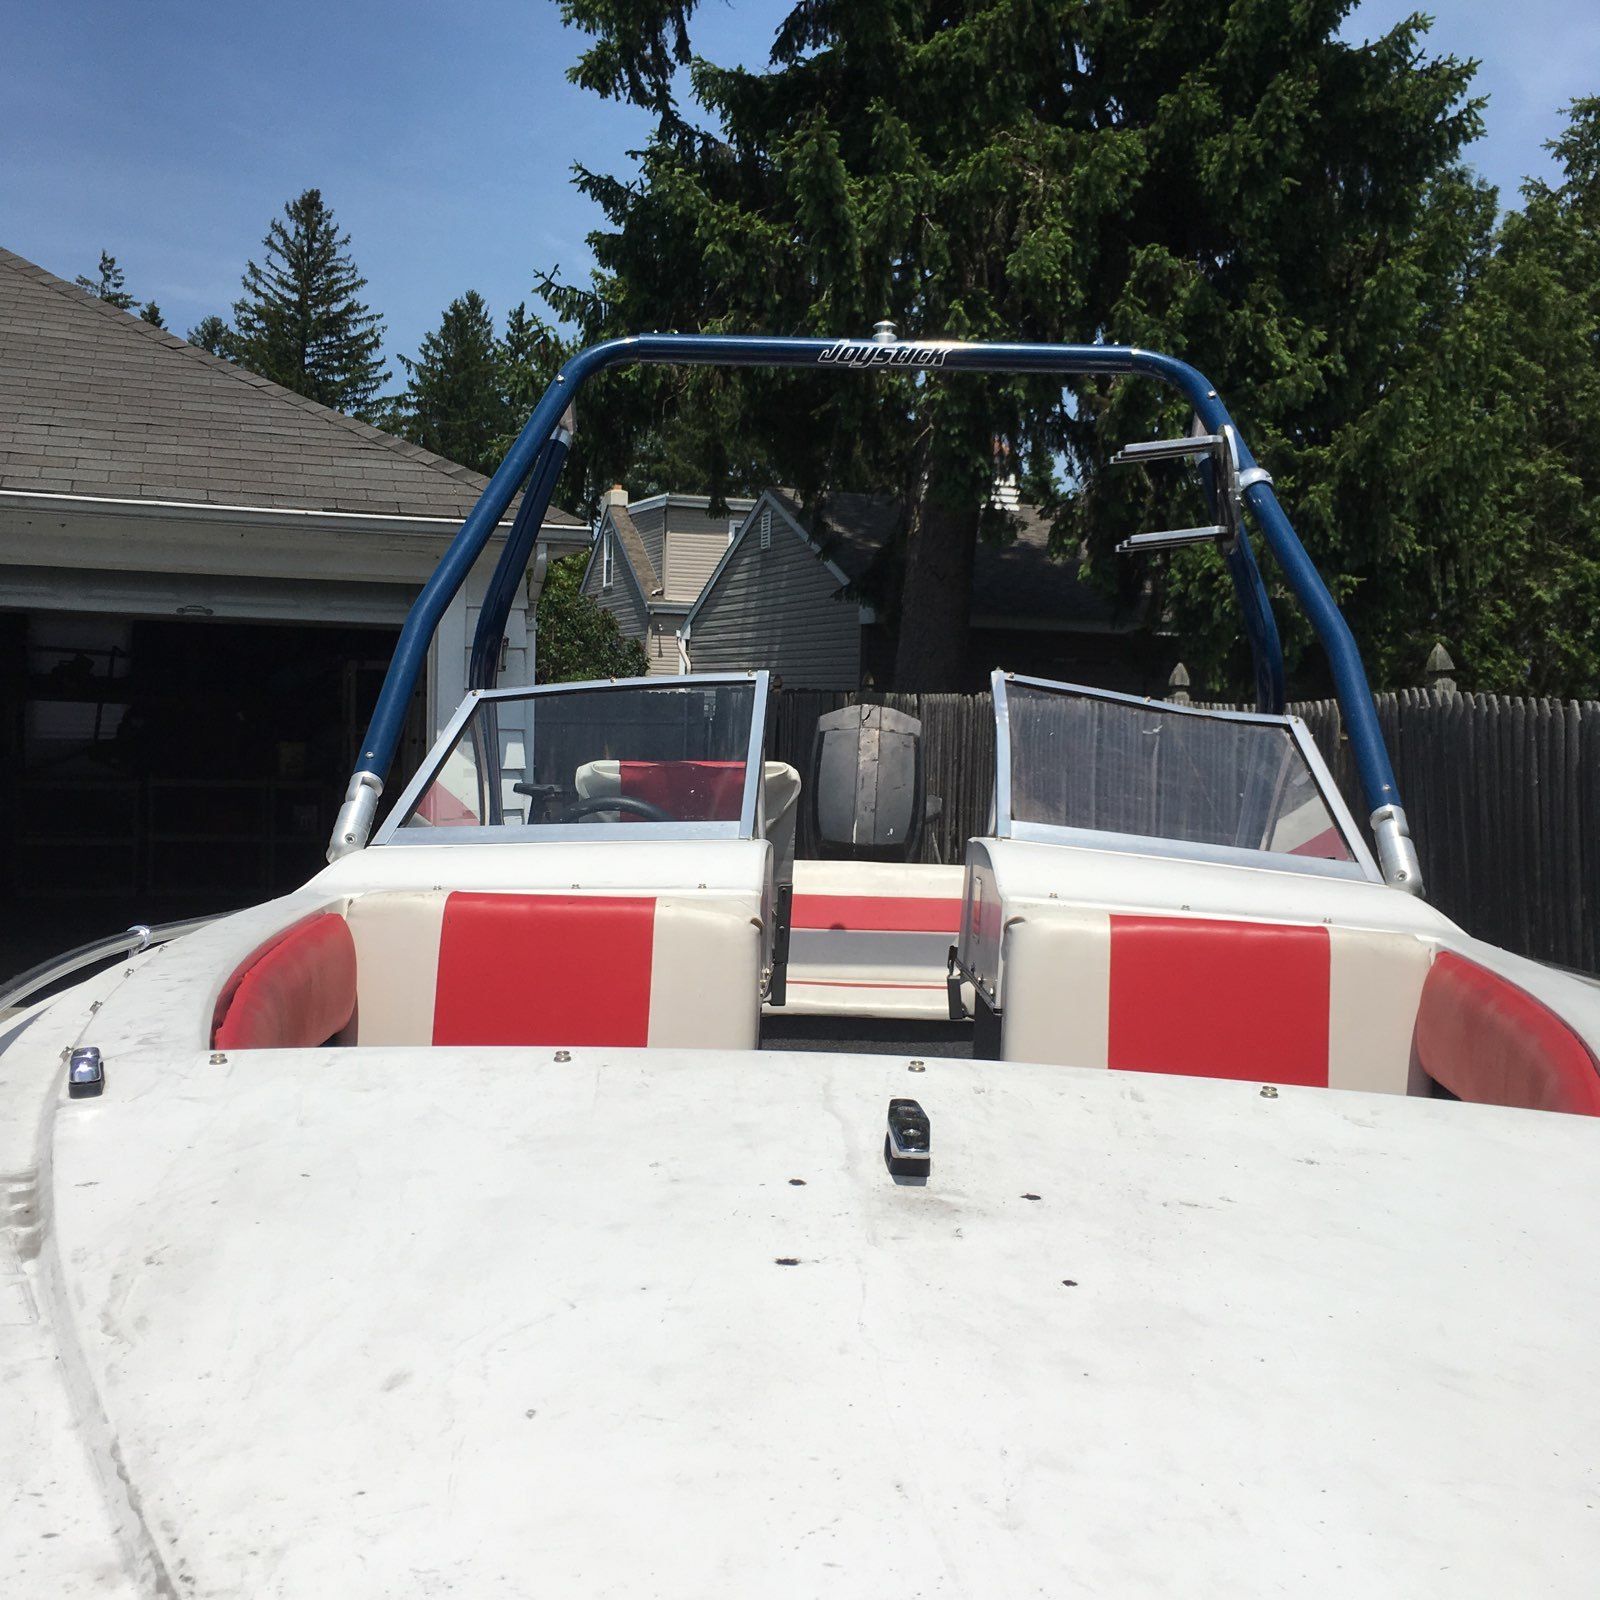 1984 checkmate boat